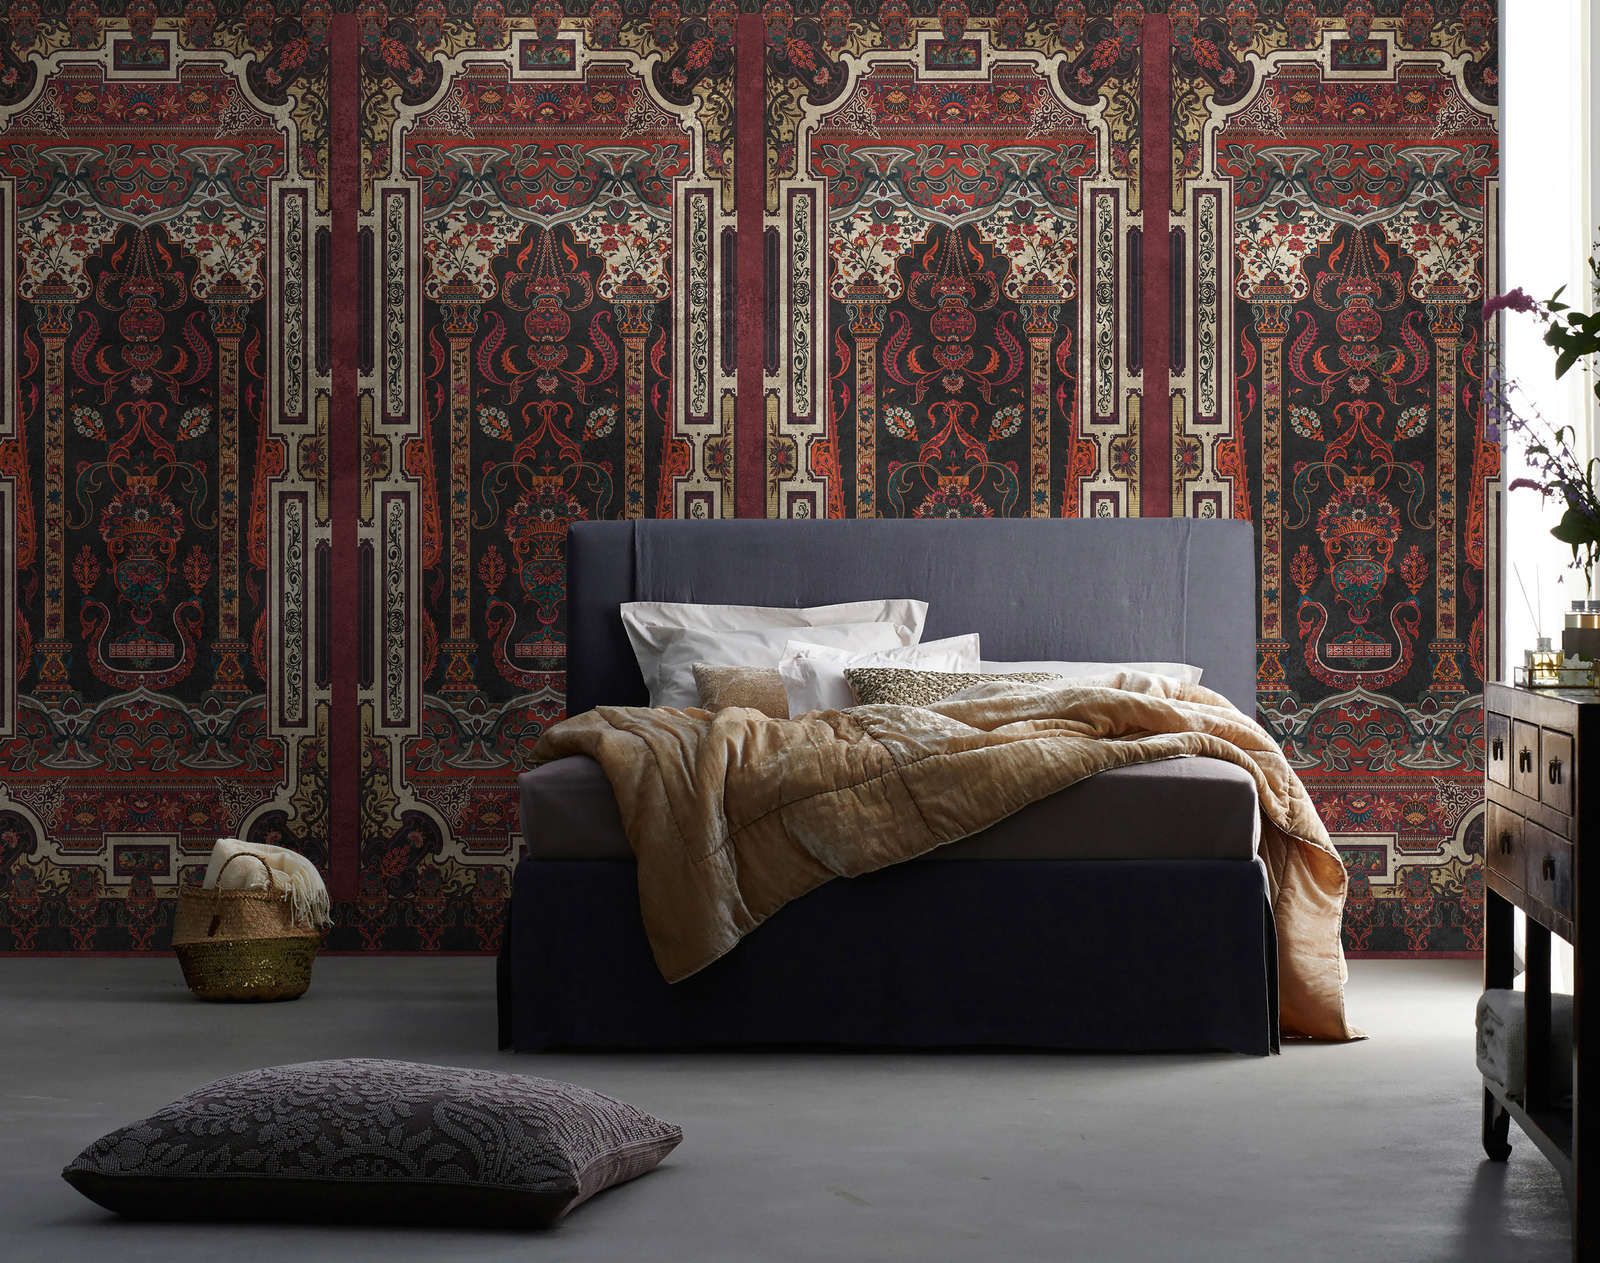             Photo wallpaper »karim« - Ornamental panelling with vintage plaster texture - Dark red | Smooth, slightly shiny premium non-woven fabric
        